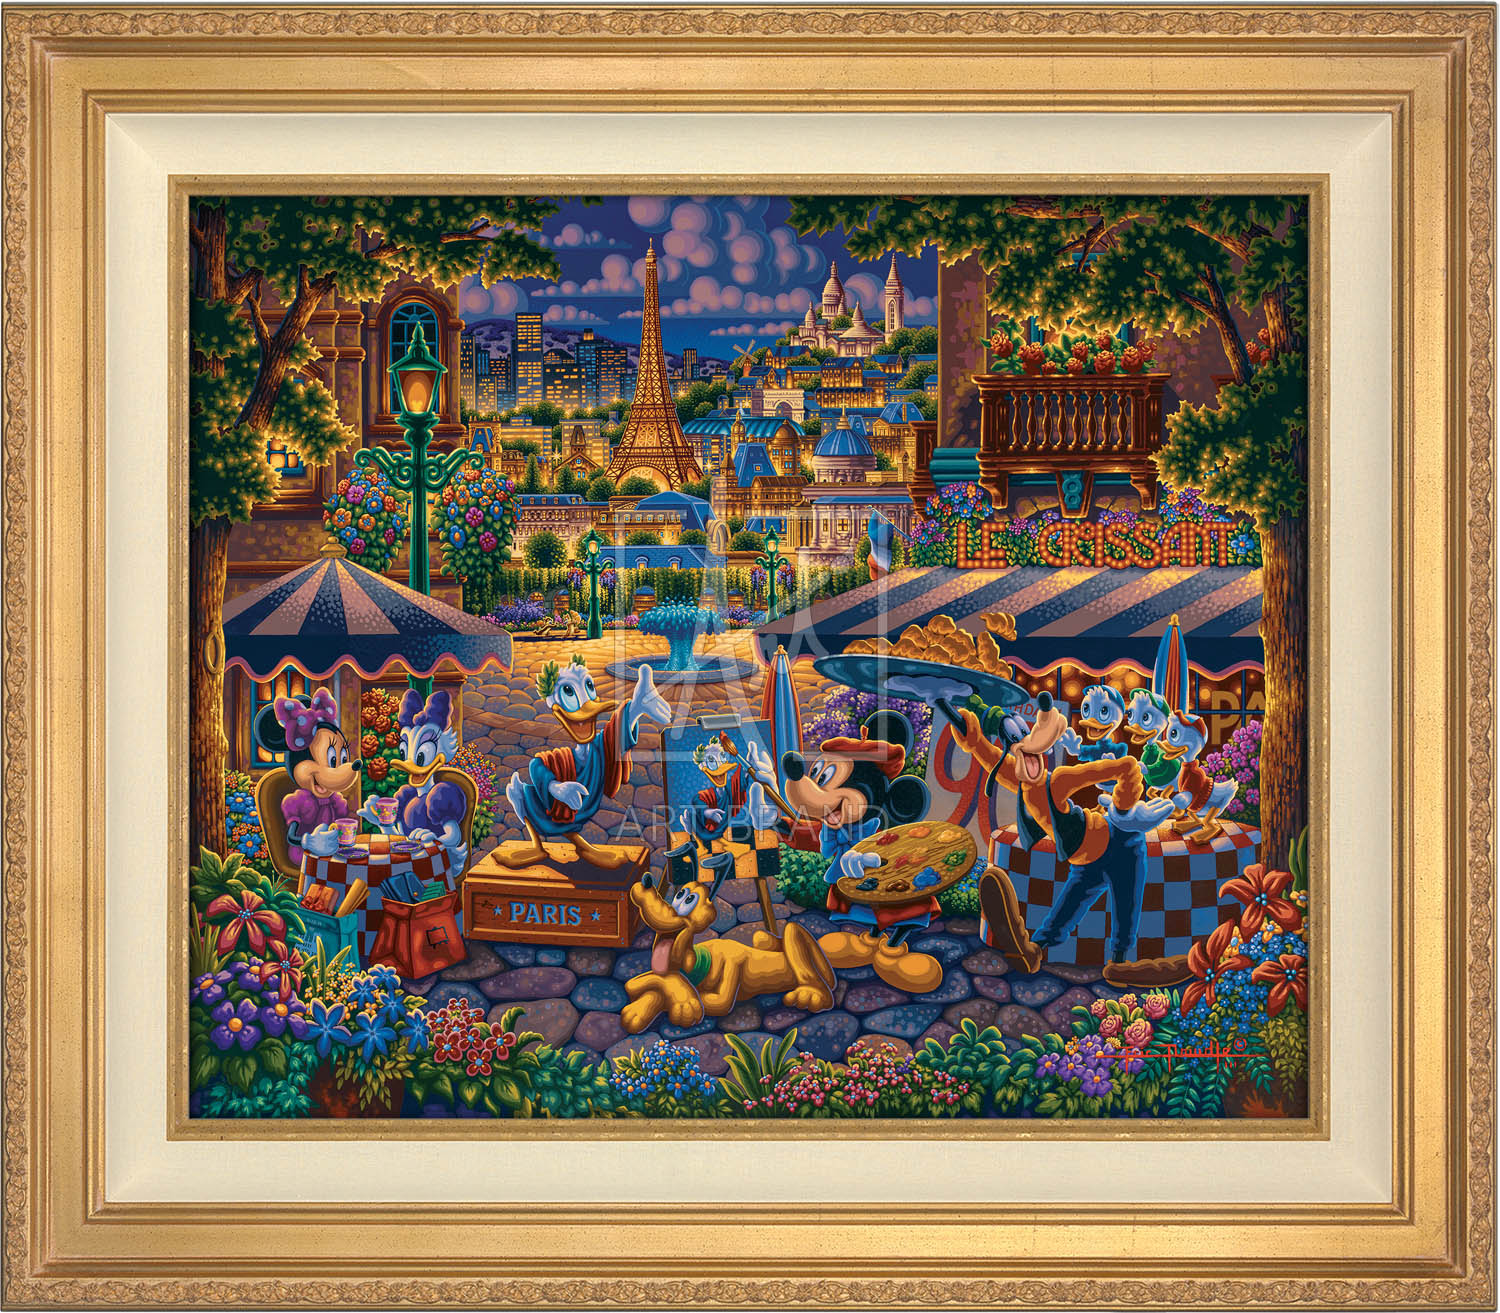 Mickey Mouse and Donald Duck playing the part of both artist and model, as they enjoy the company of friends, in the courtyard plaza in Paris - Antique Gold Frame. 